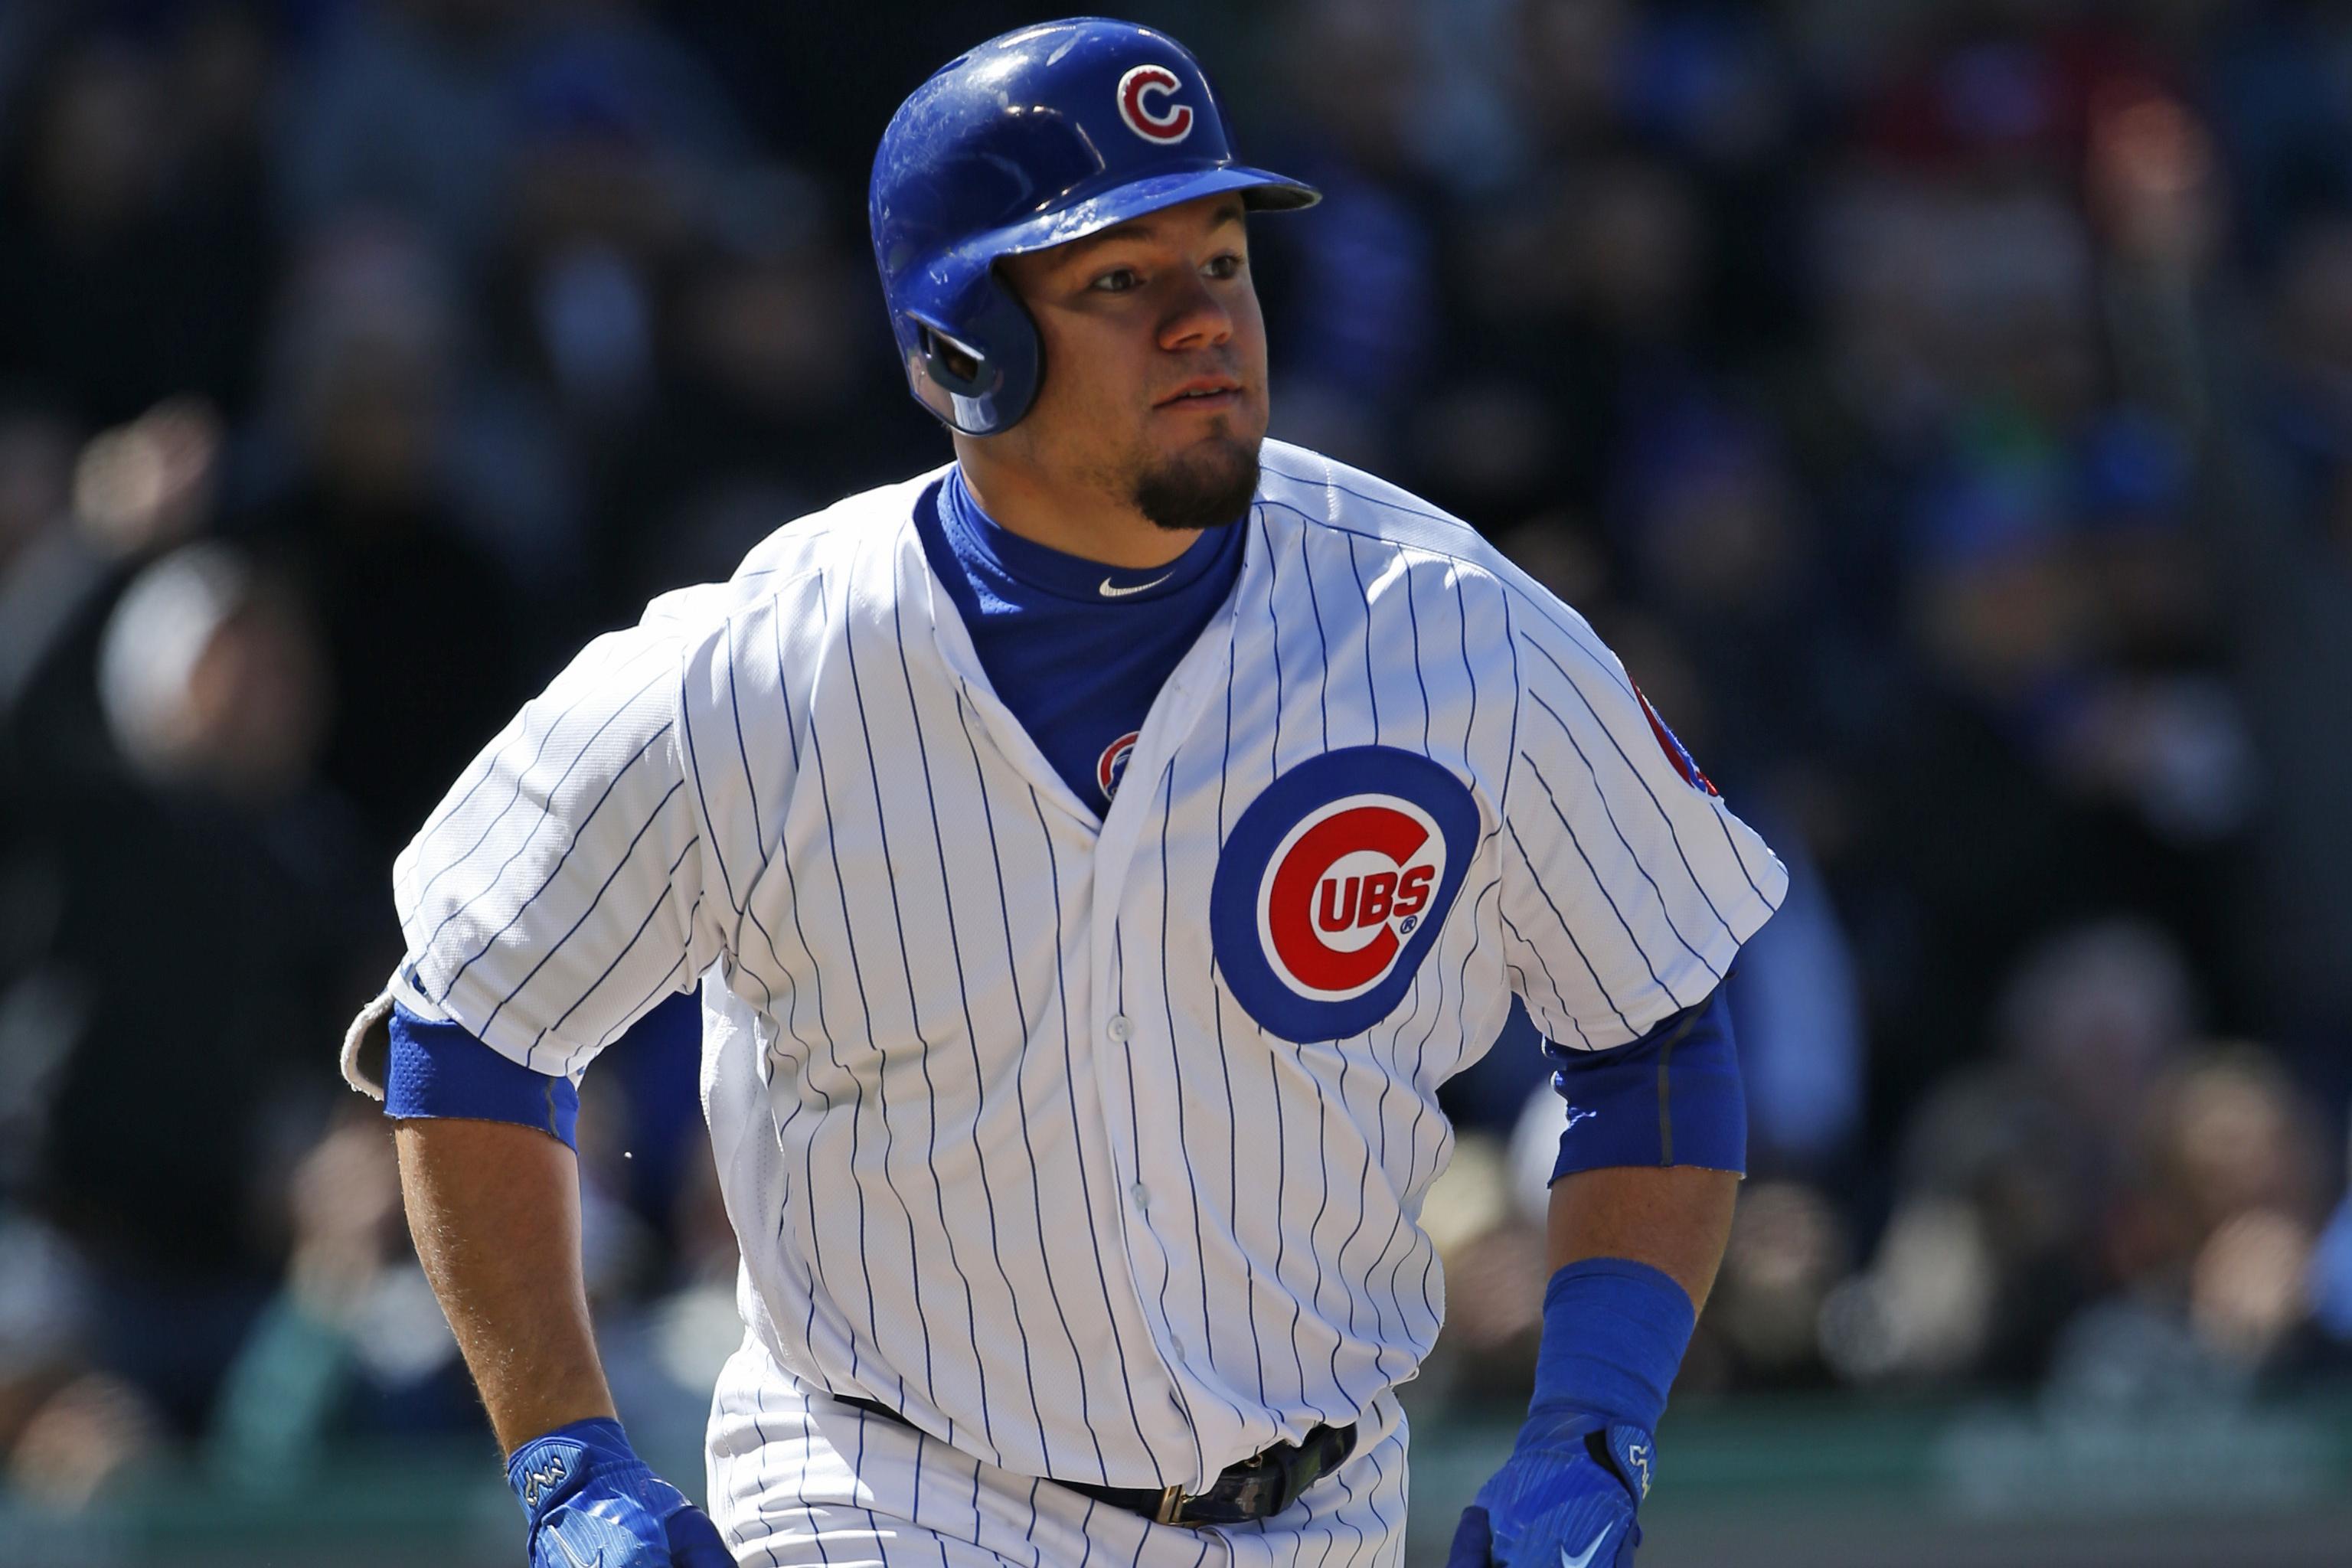 Former IU catcher Kyle Schwarber to be recalled by Cubs